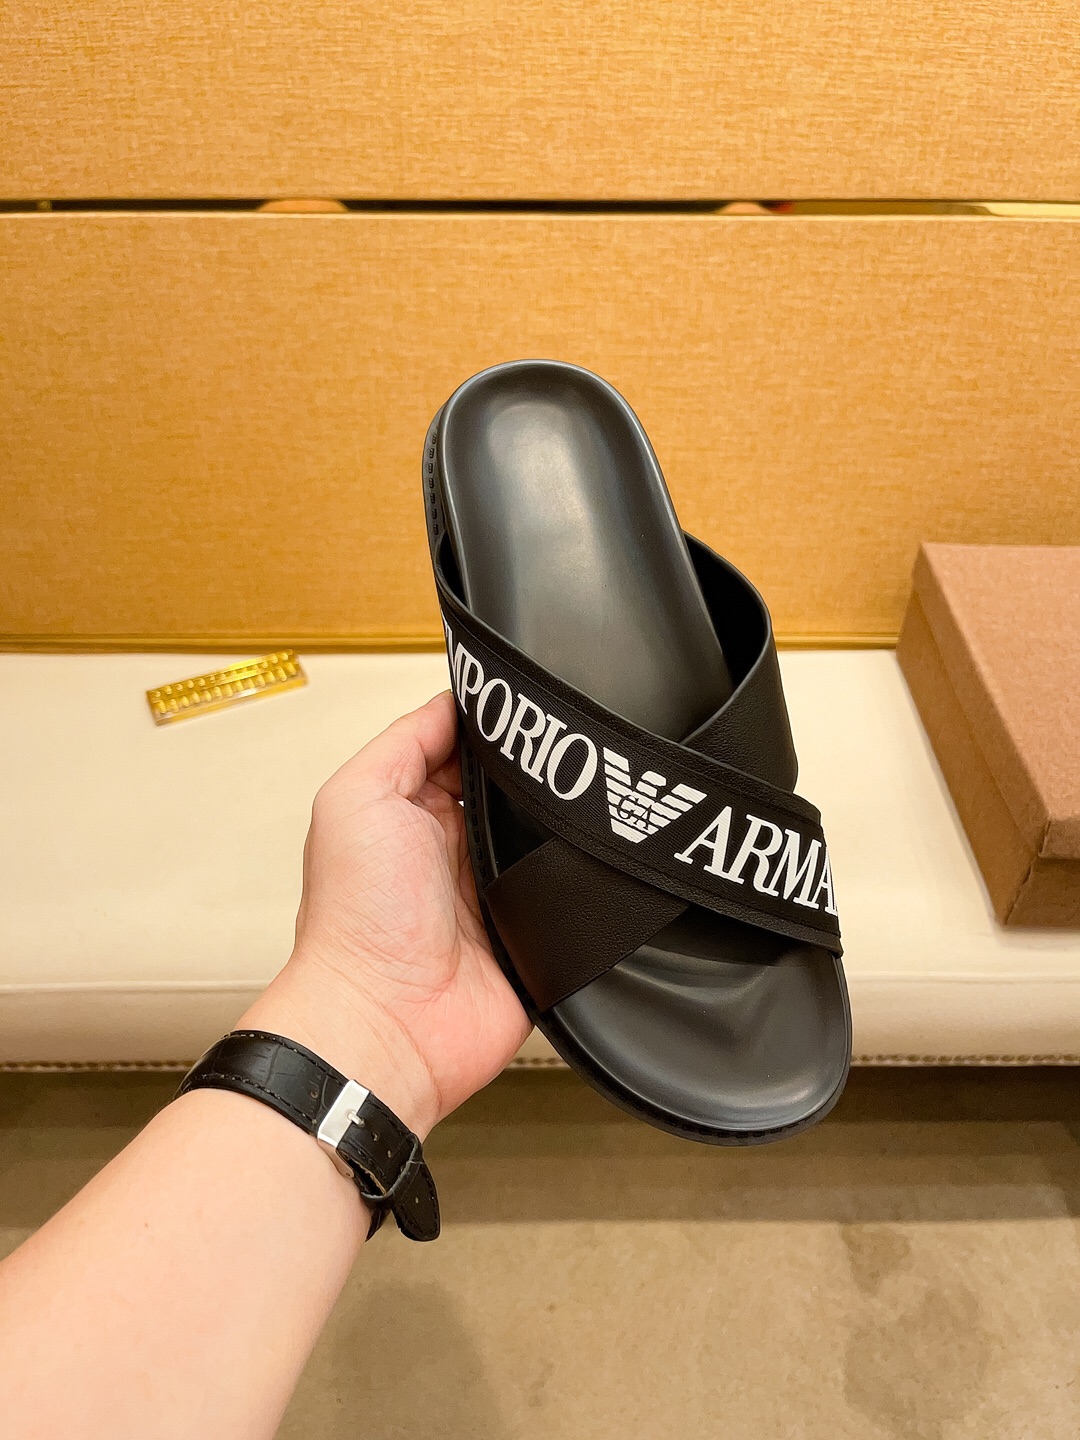 Armani Slippers For Men # 269760, cheap Armani Slipper, only $56!